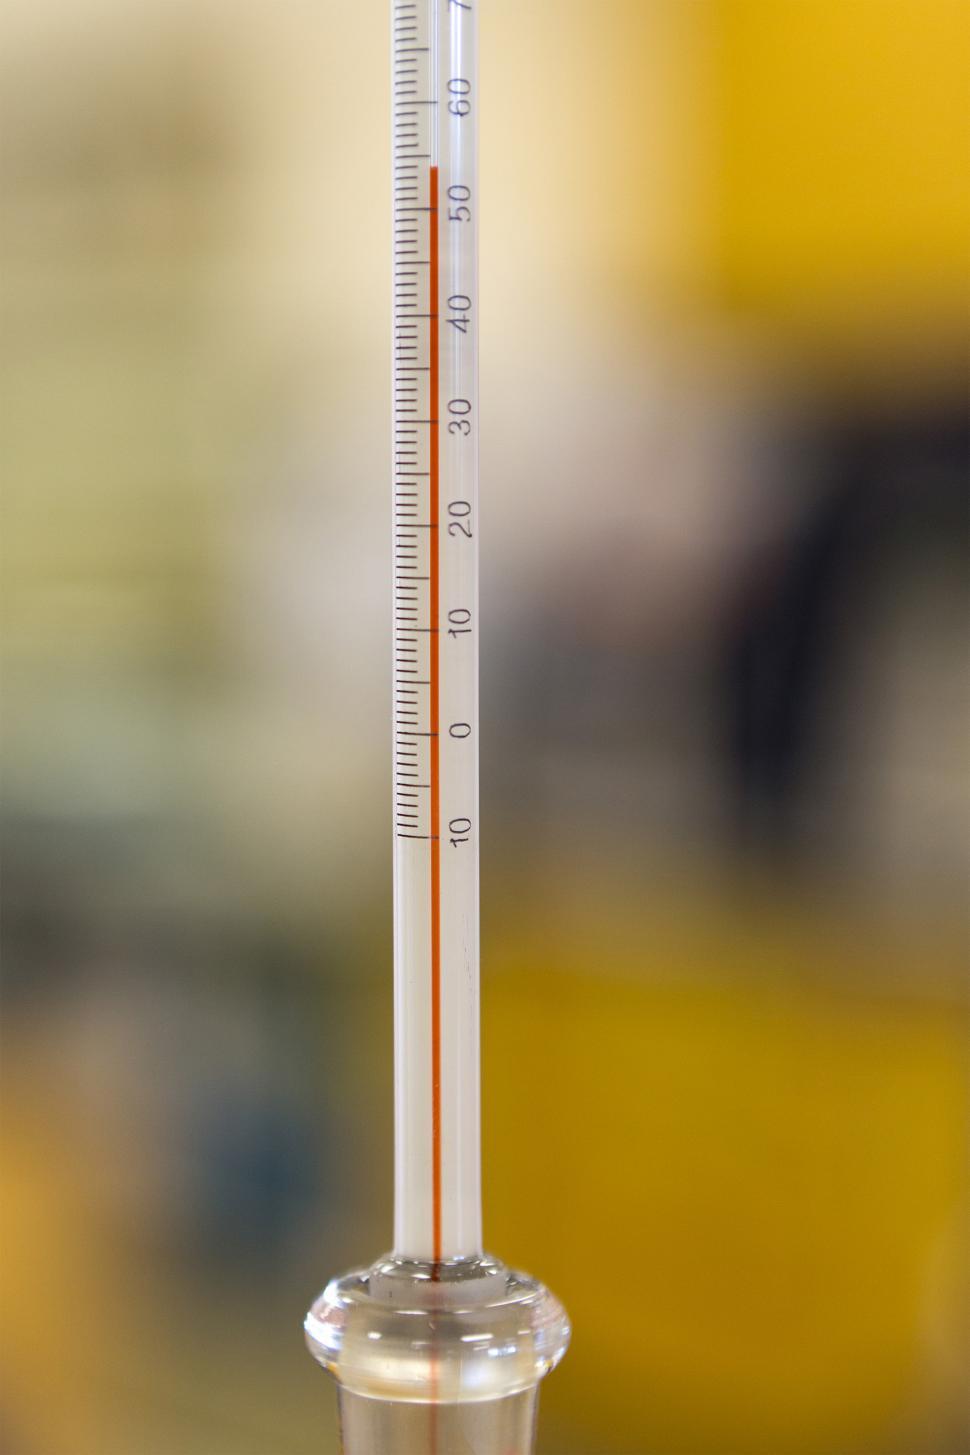 Download Free Stock Photo of Lab Thermometer 